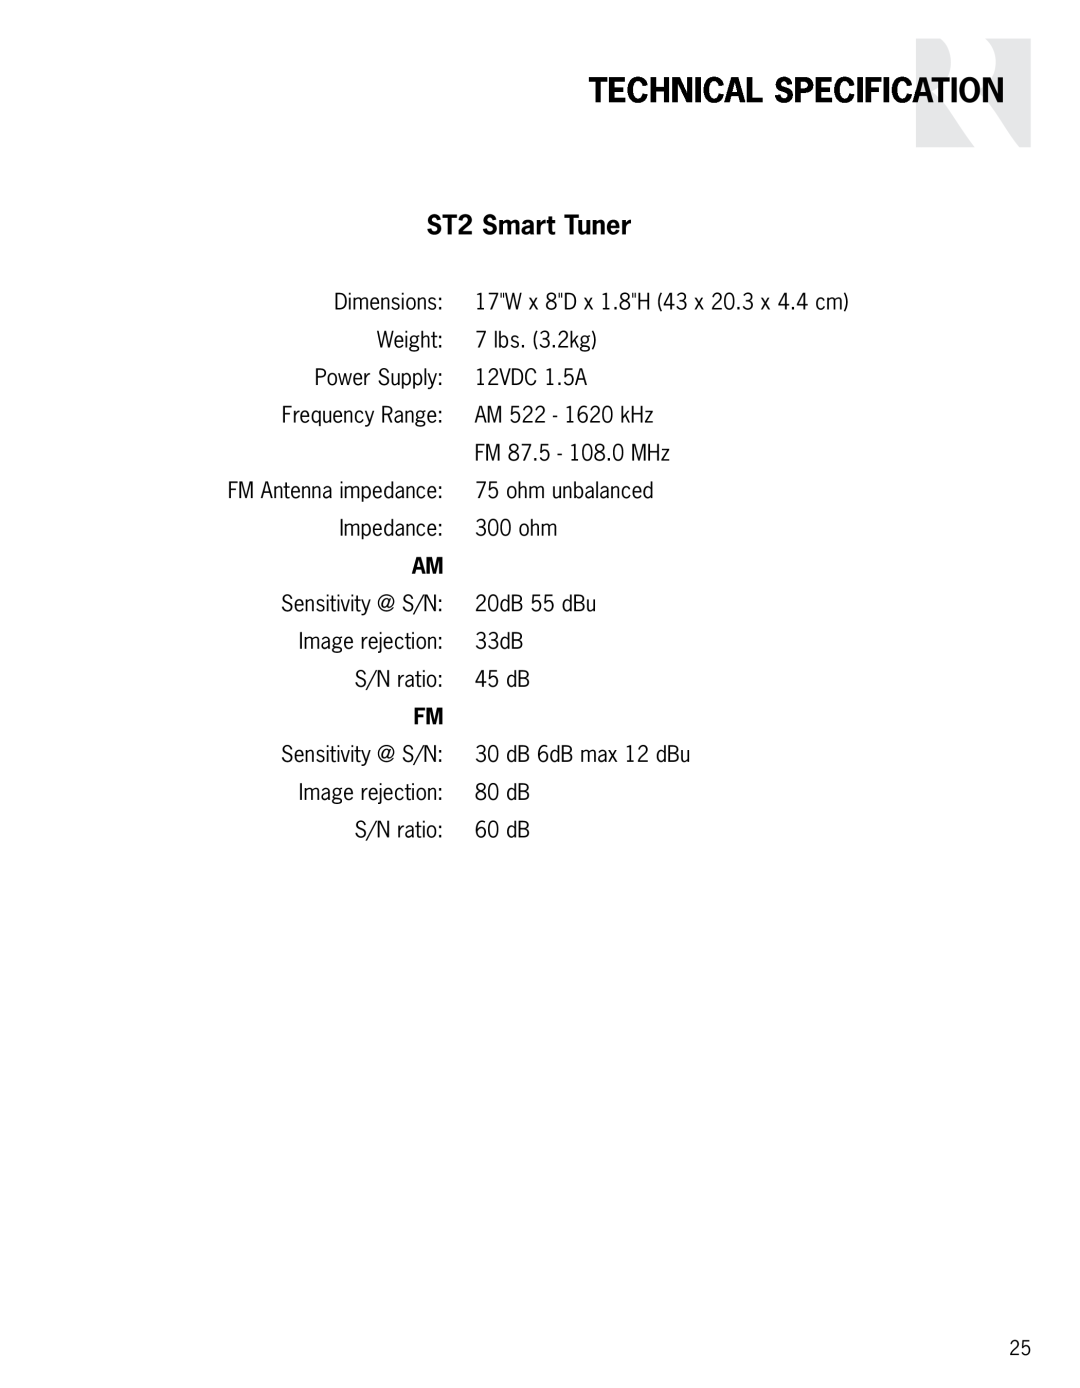 Russound instruction manual Technical Specification, ST2 Smart Tuner 